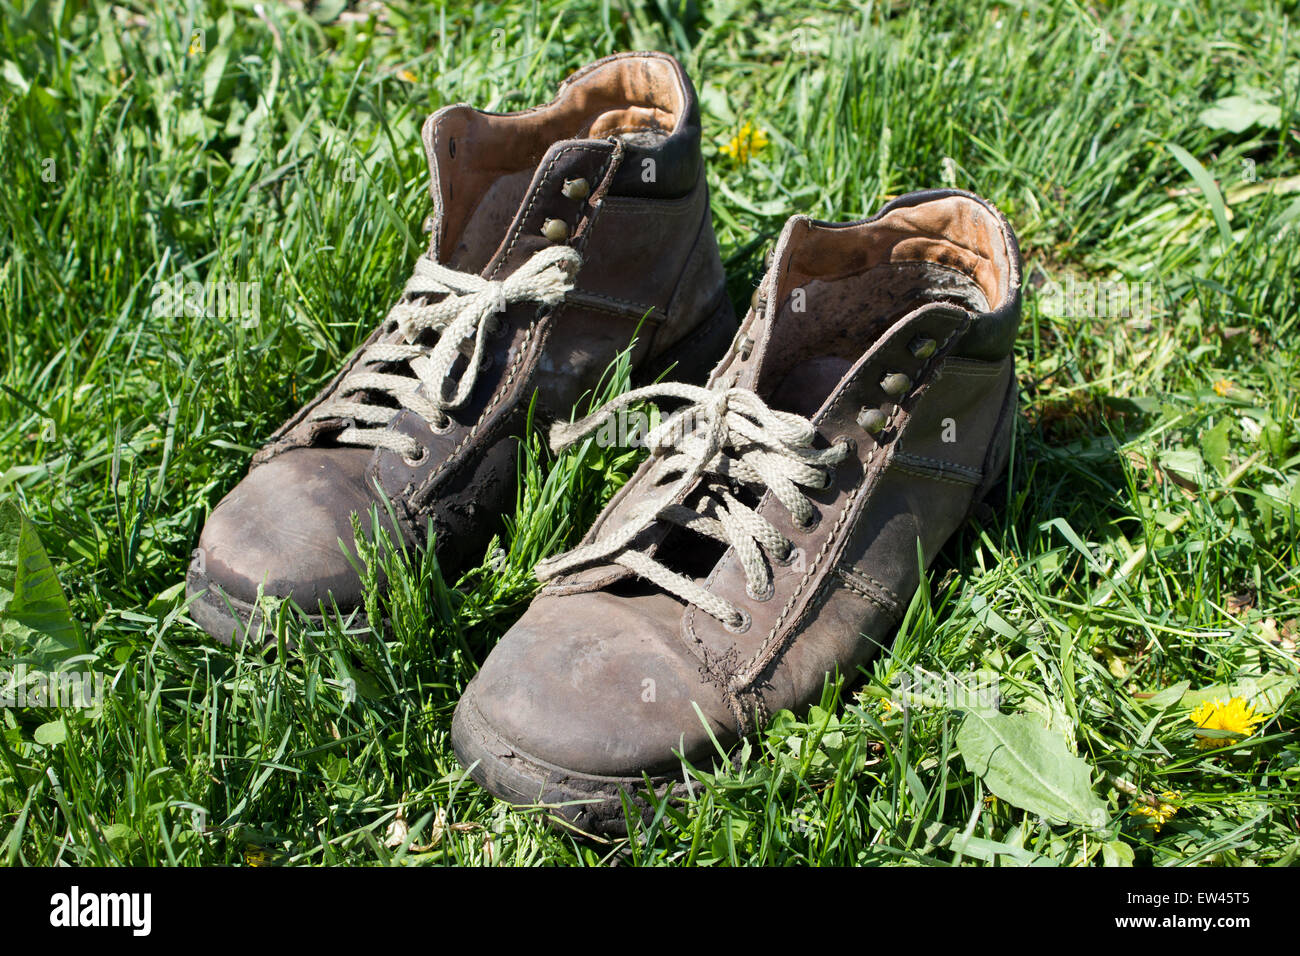 Boots on grass background/A vintage boots on grass Stock Photo - Alamy